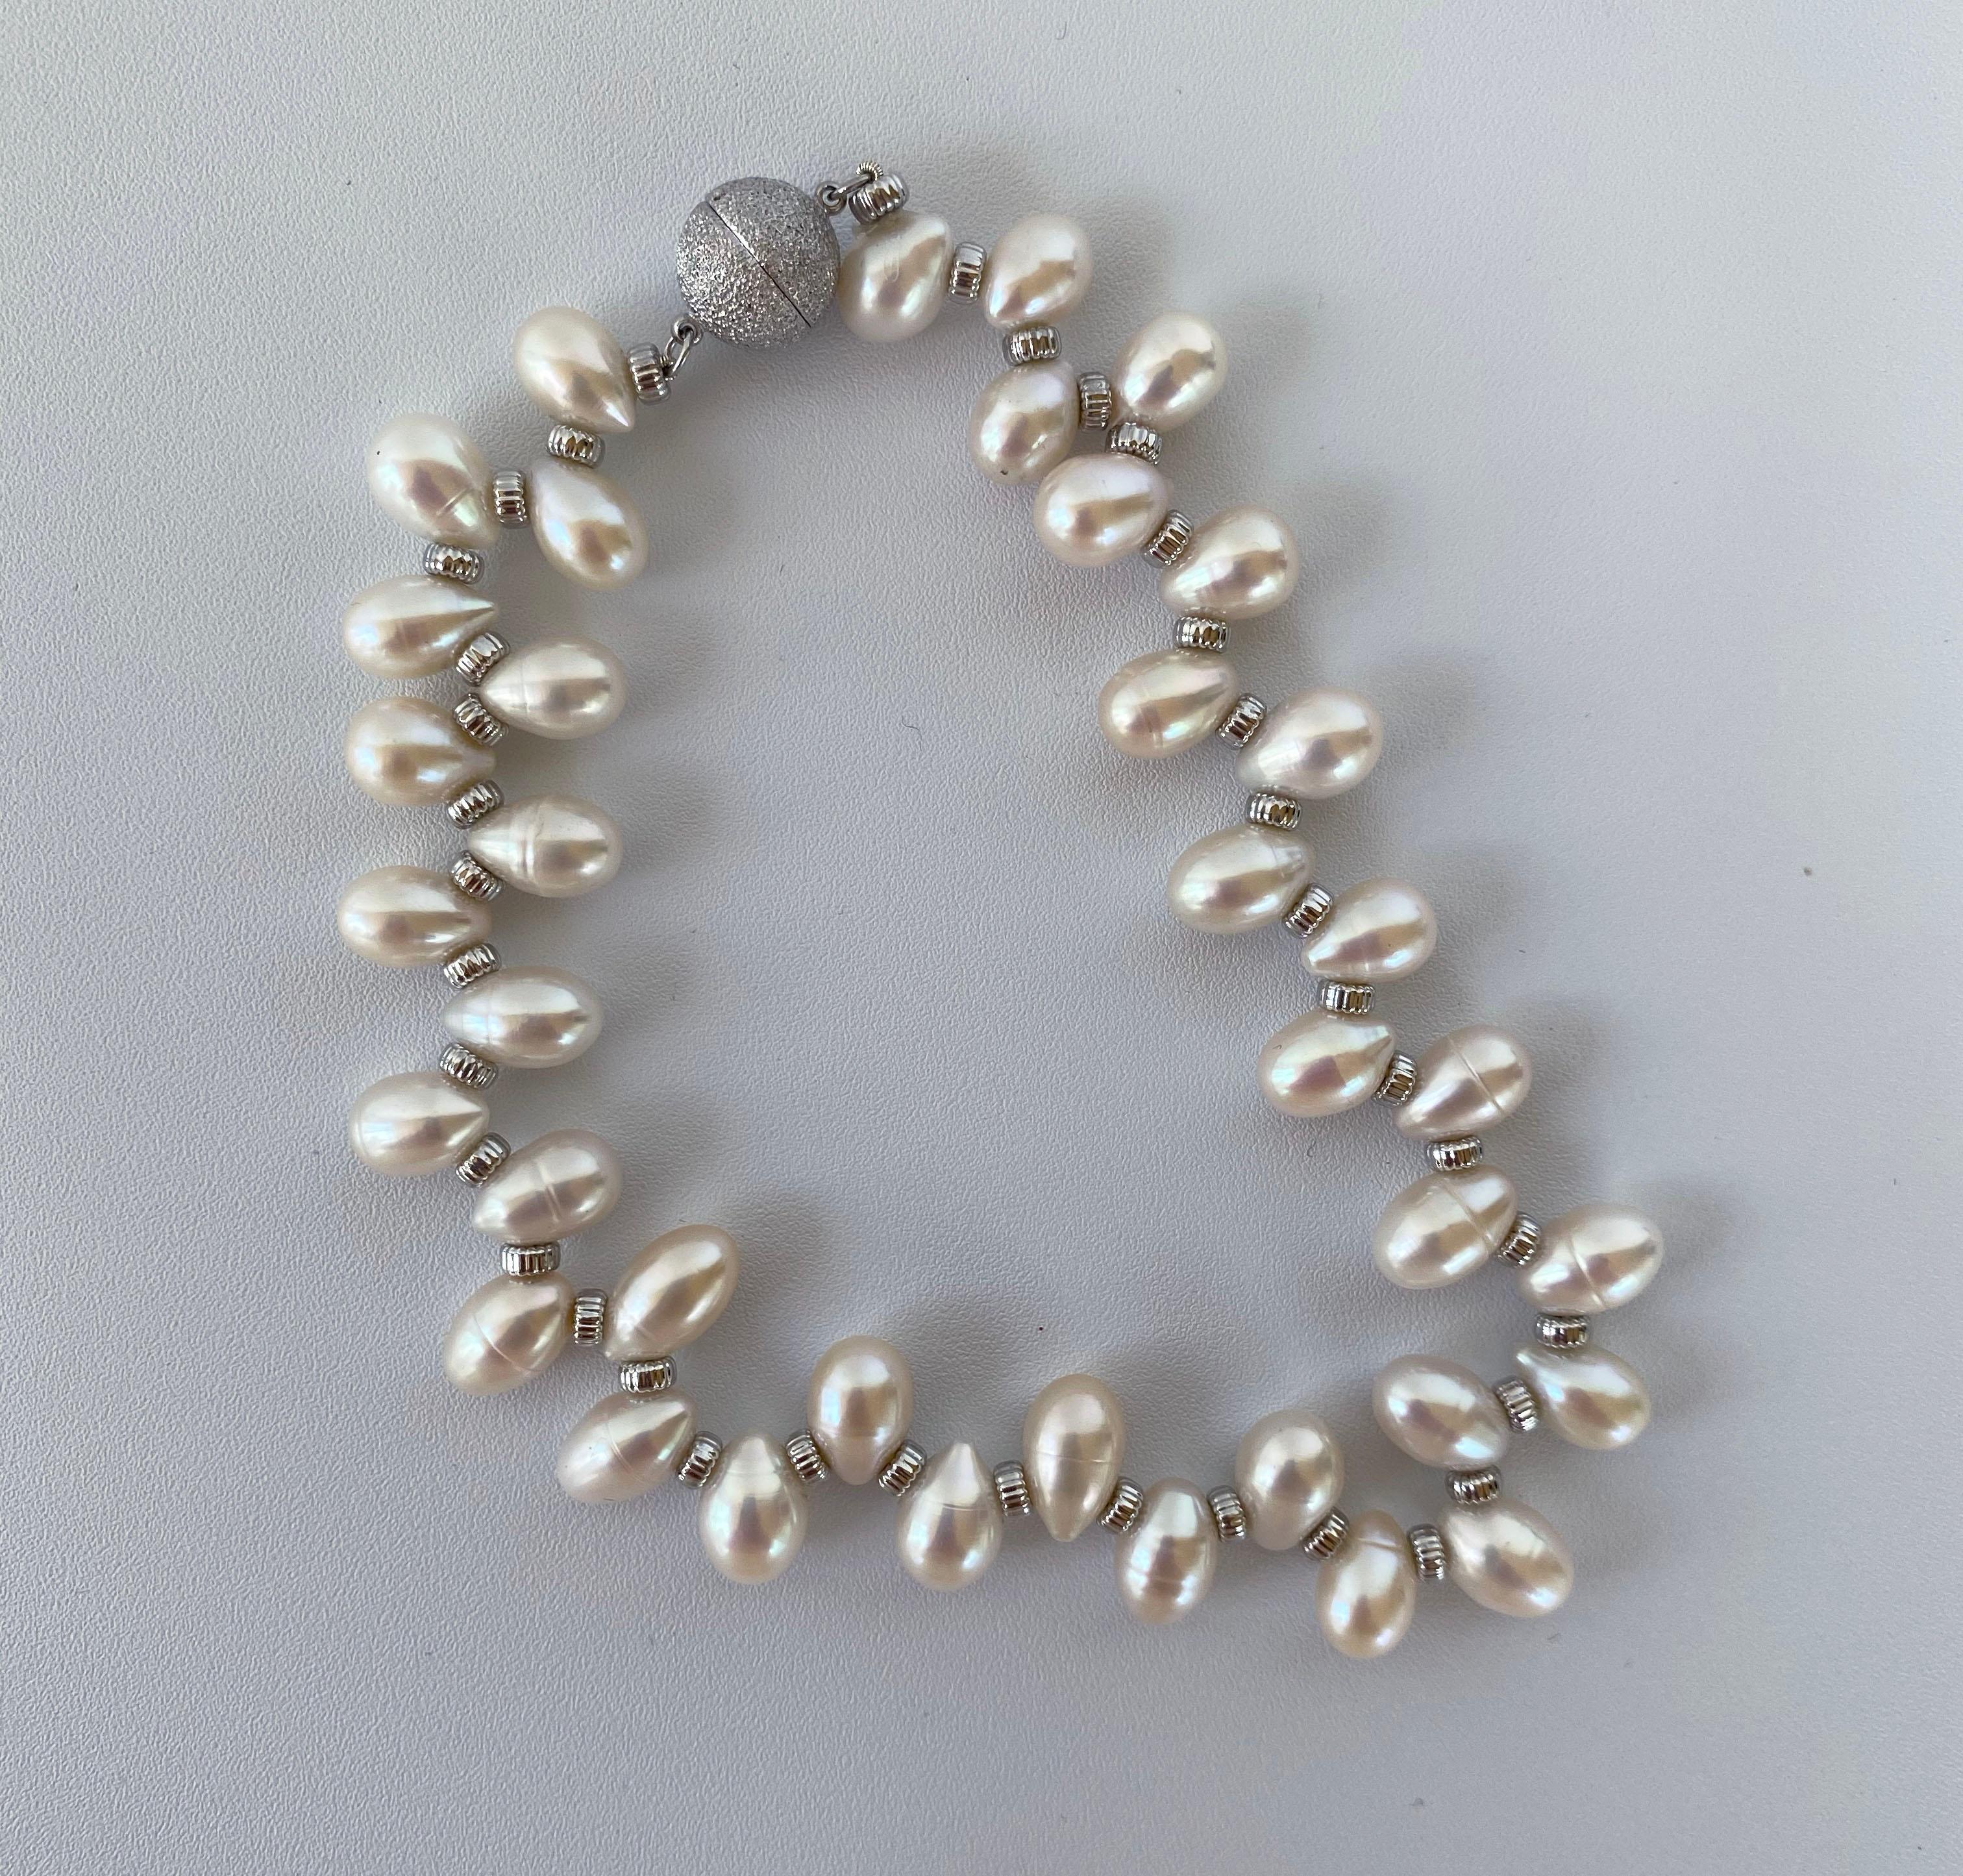 Bead Marina J. White Teardrop Pearl Pet Necklace with Magnetic Clasp